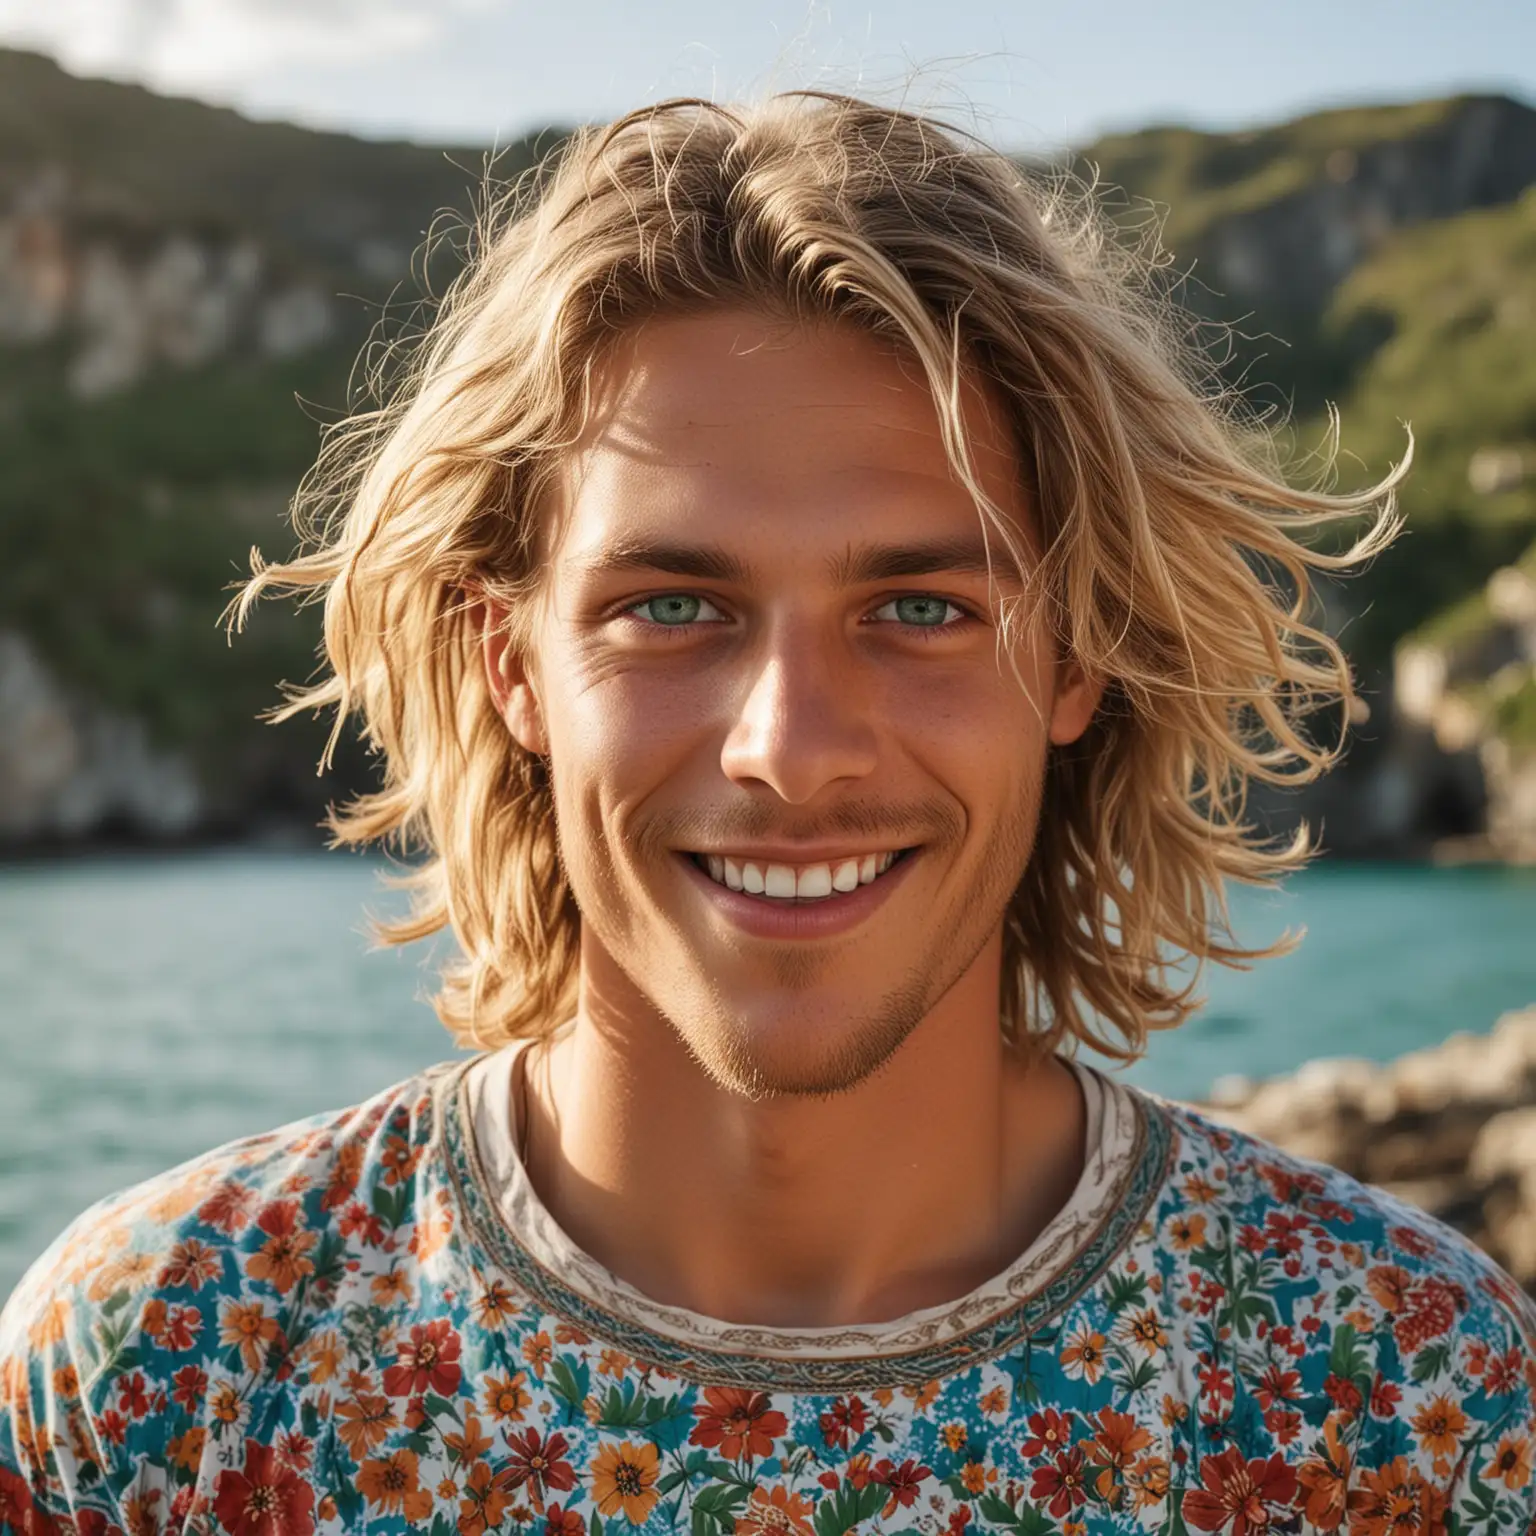 swiss 26 year old men with wide face with blue green eyes, half long blond hair, brown skin of the sun, with a nice hippy shirt on happy on a island